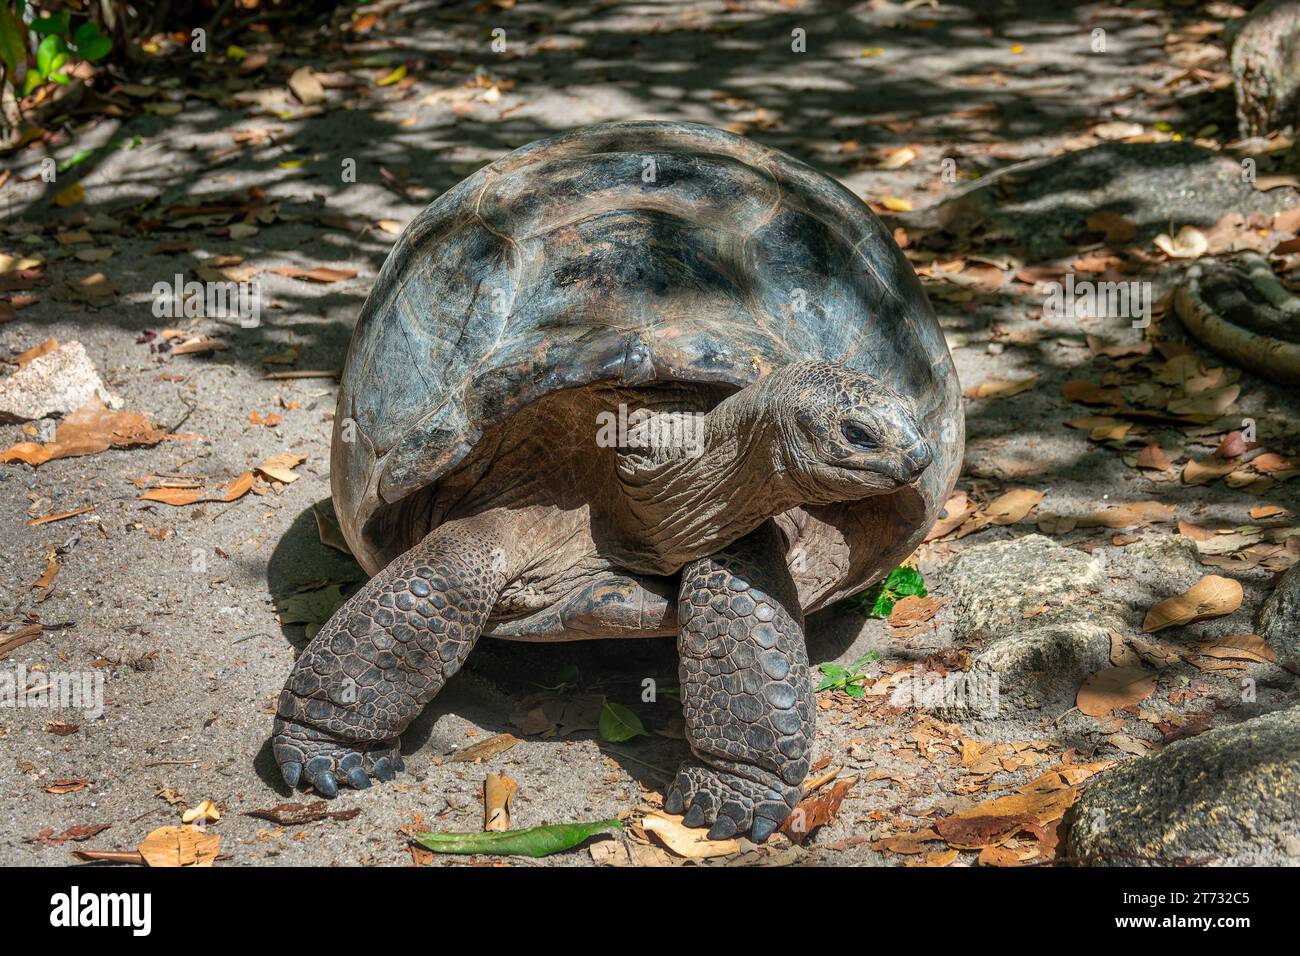 Giant tortoise in the forest at Curieuse island, Seychelles Stock Photo